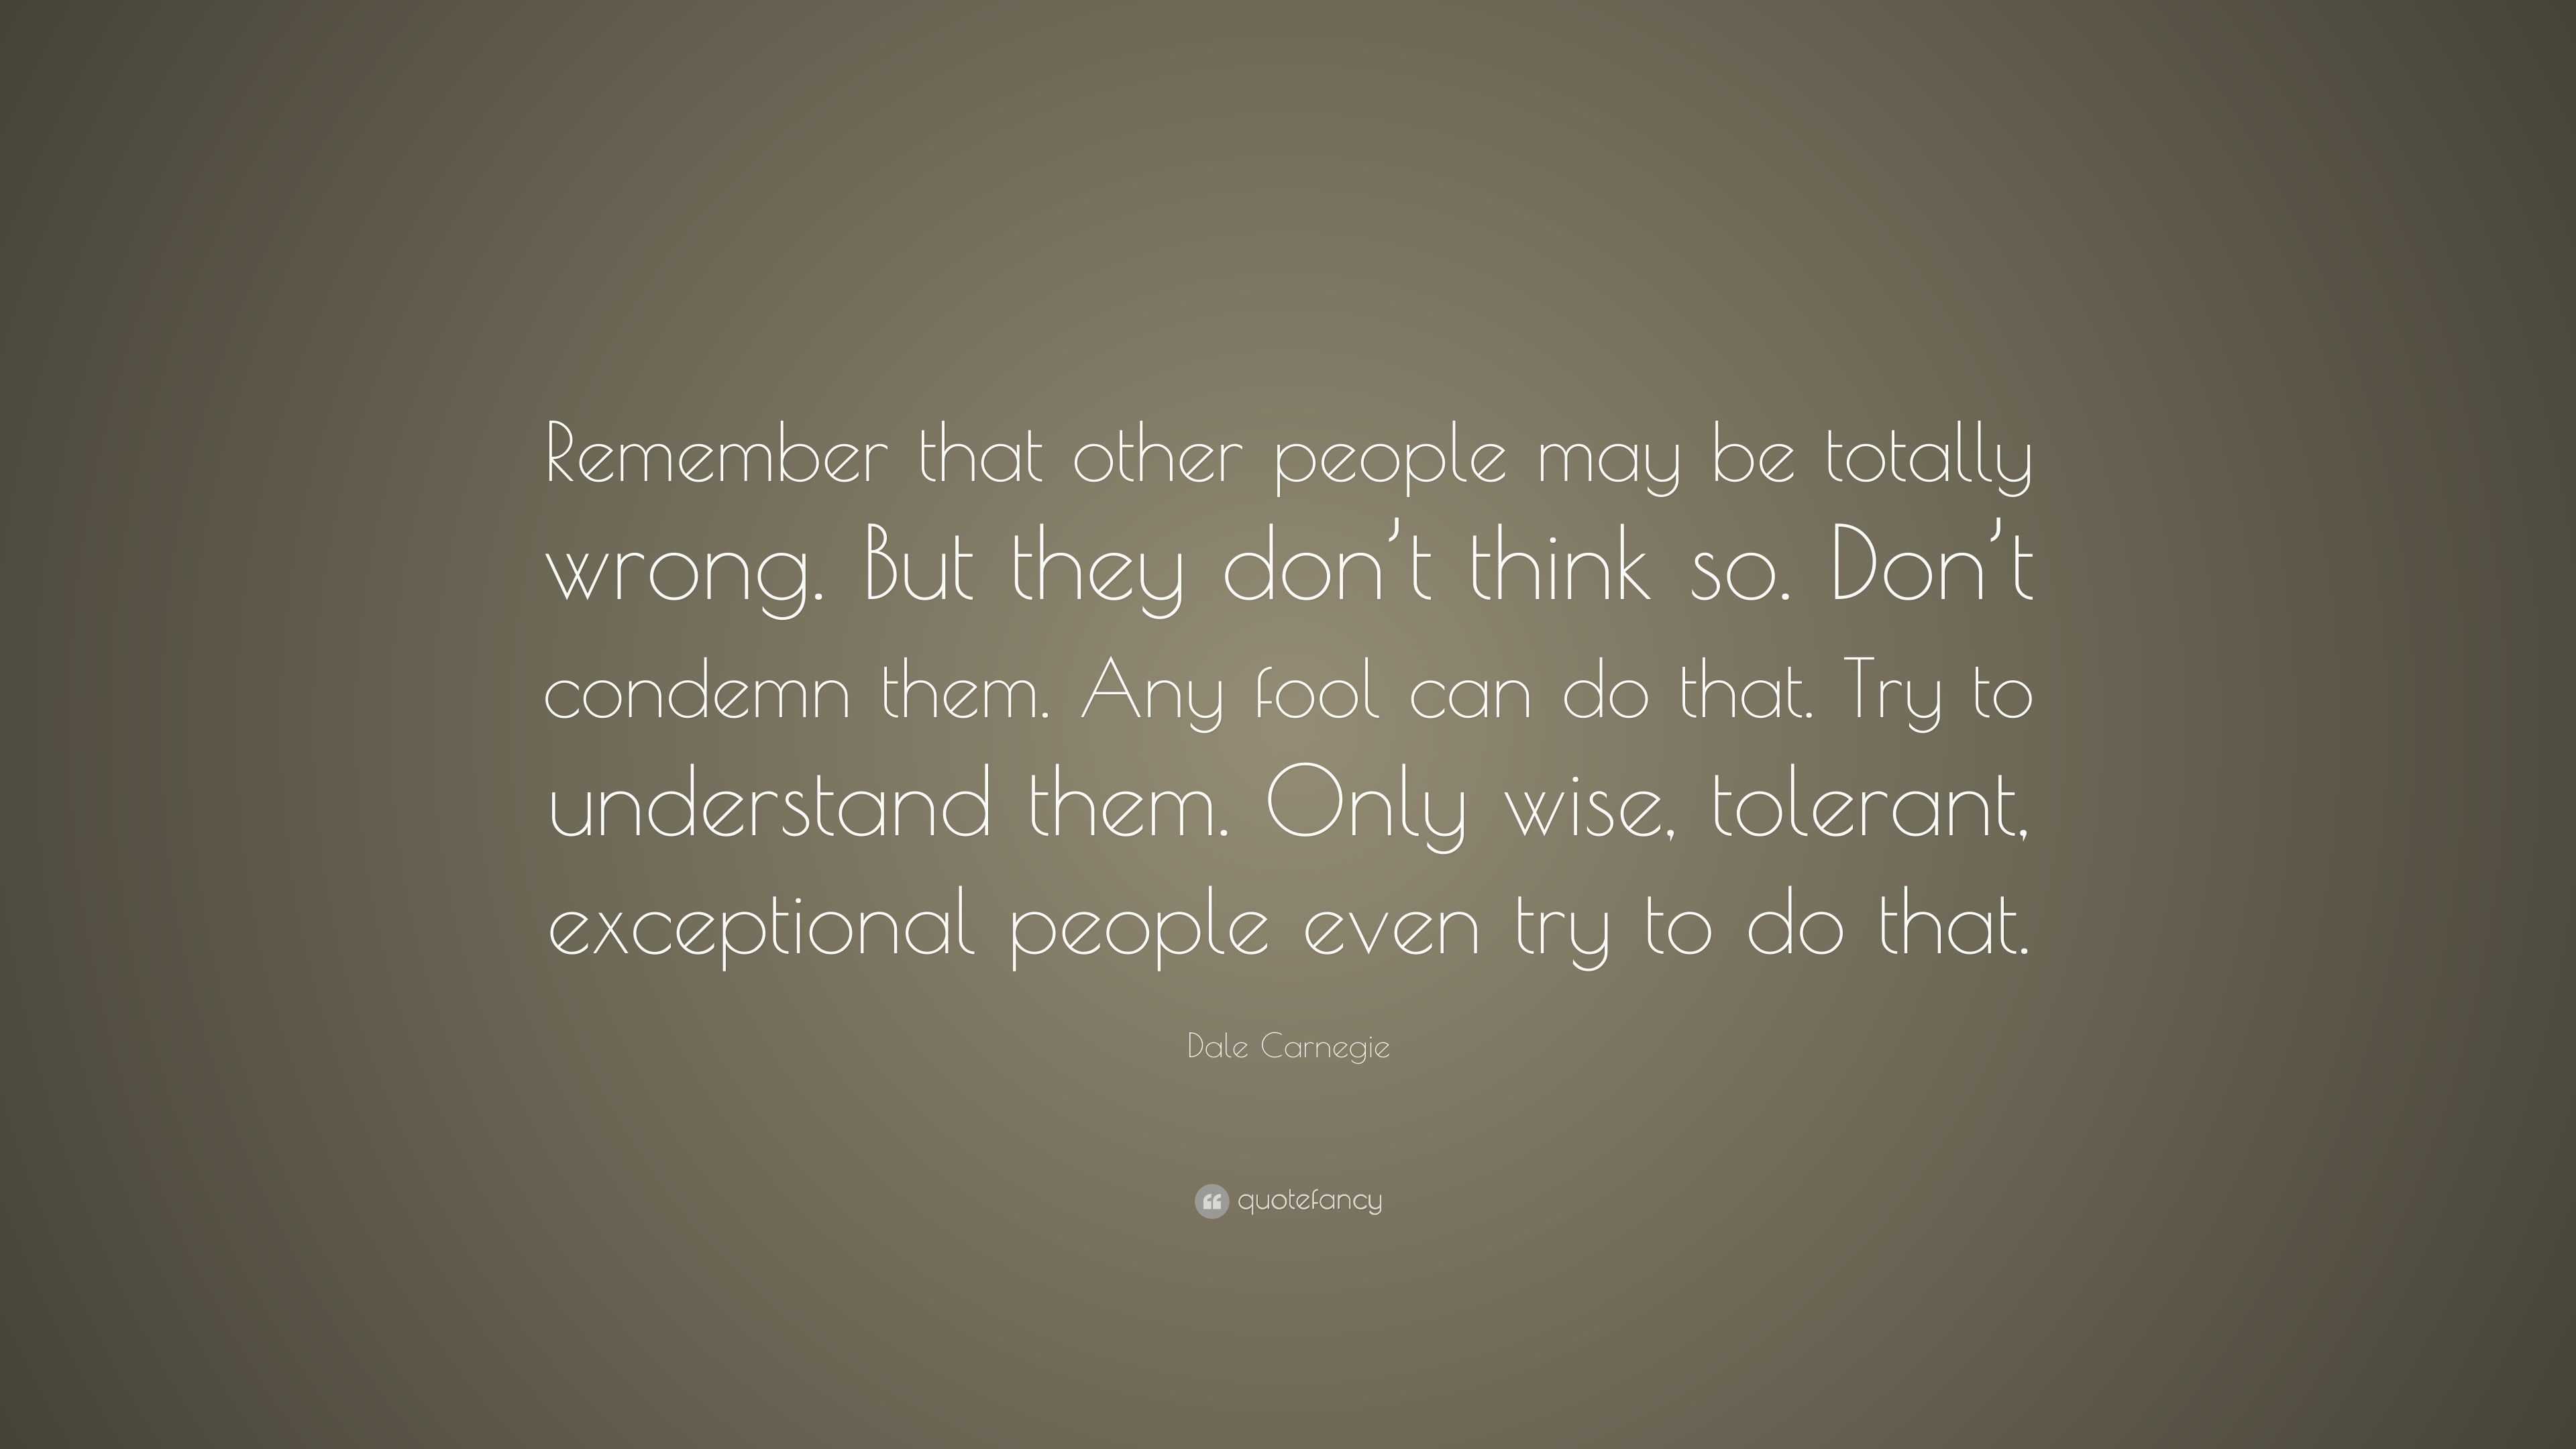 Dale Carnegie Quote: “Remember that other people may be totally wrong ...